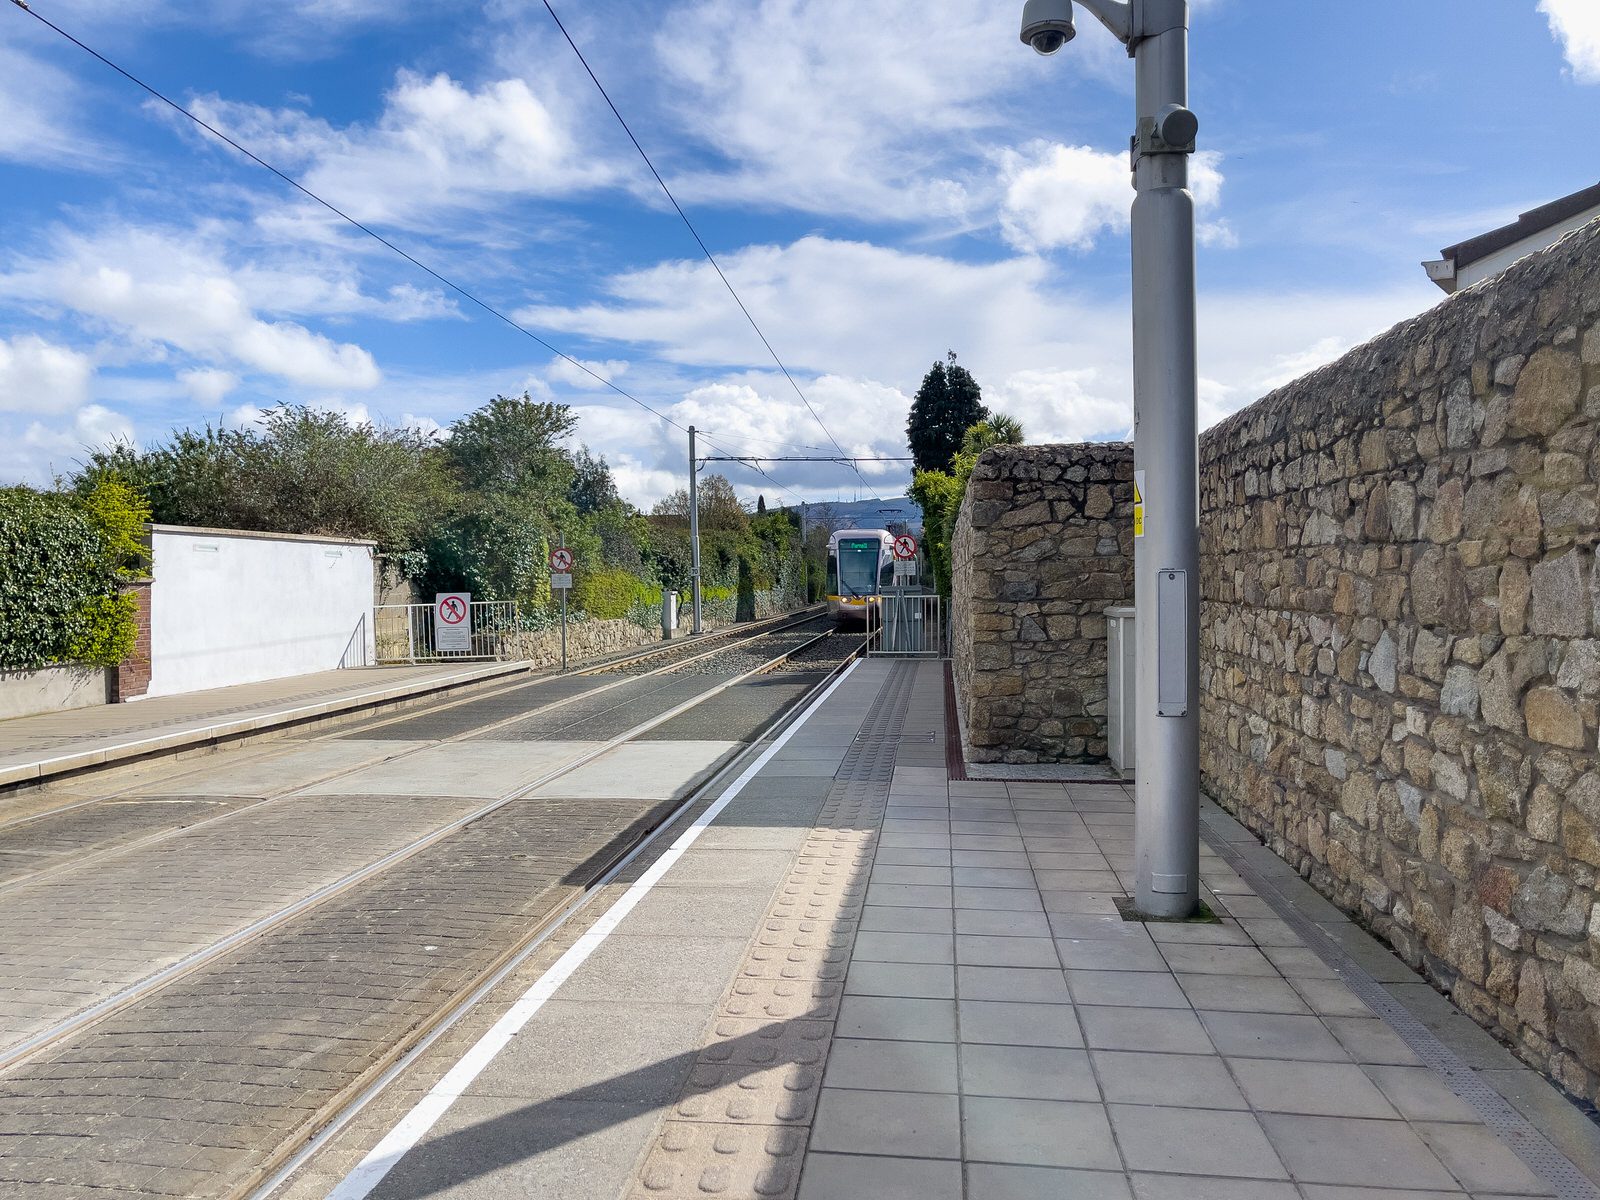 THE LUAS TRAM STOP AT WINDY ARBOUR AND THE IMMEDIATE AREA 035